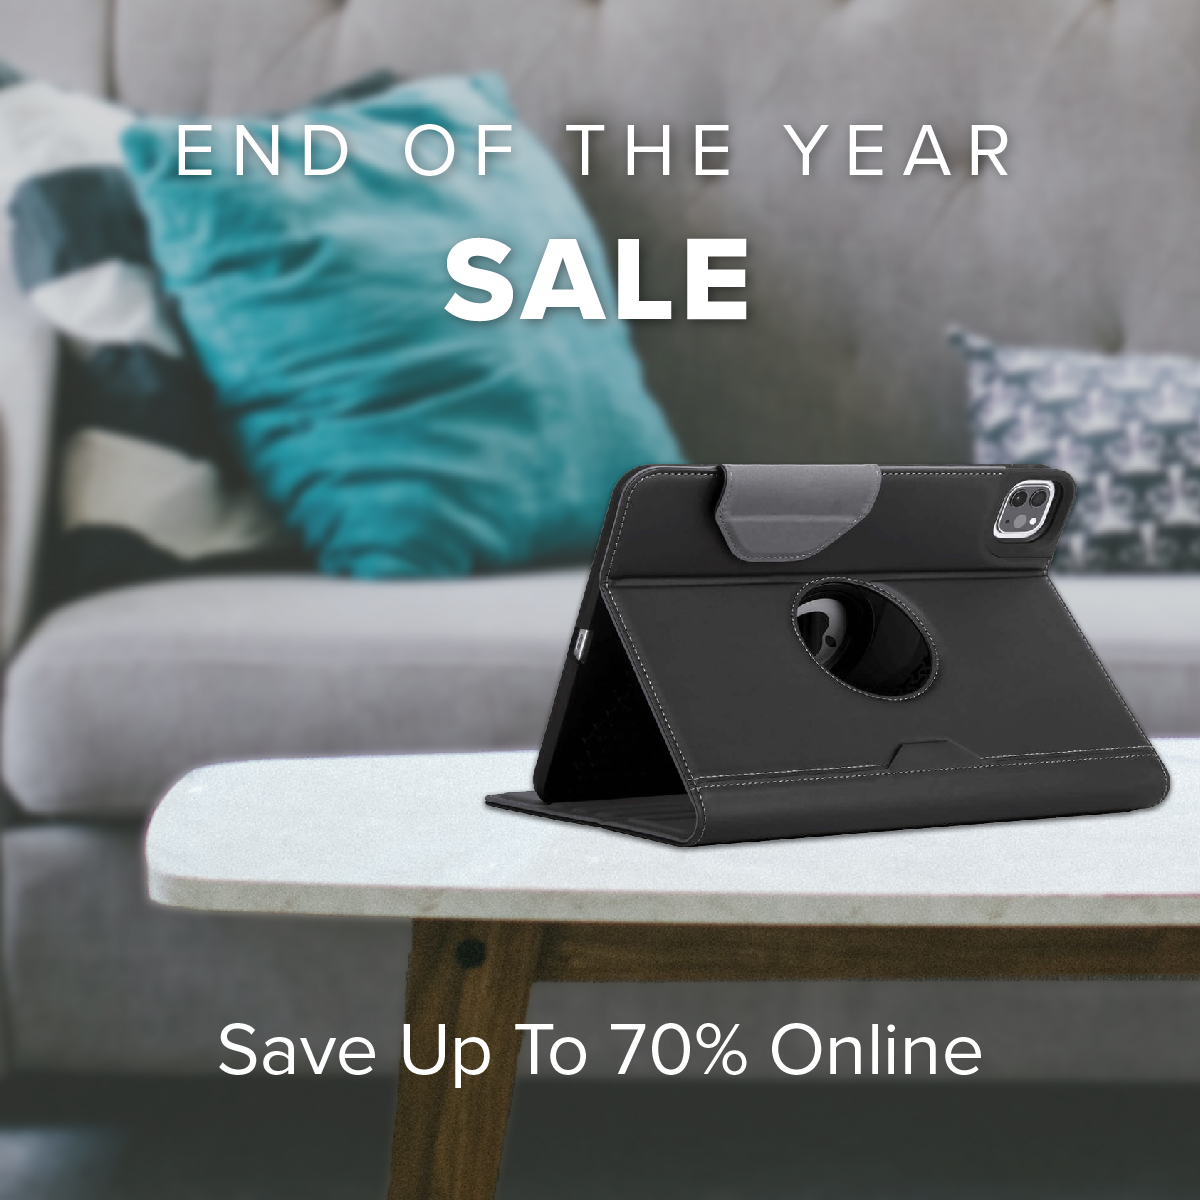 End Of The Year Sale | Save Up To 70% Online